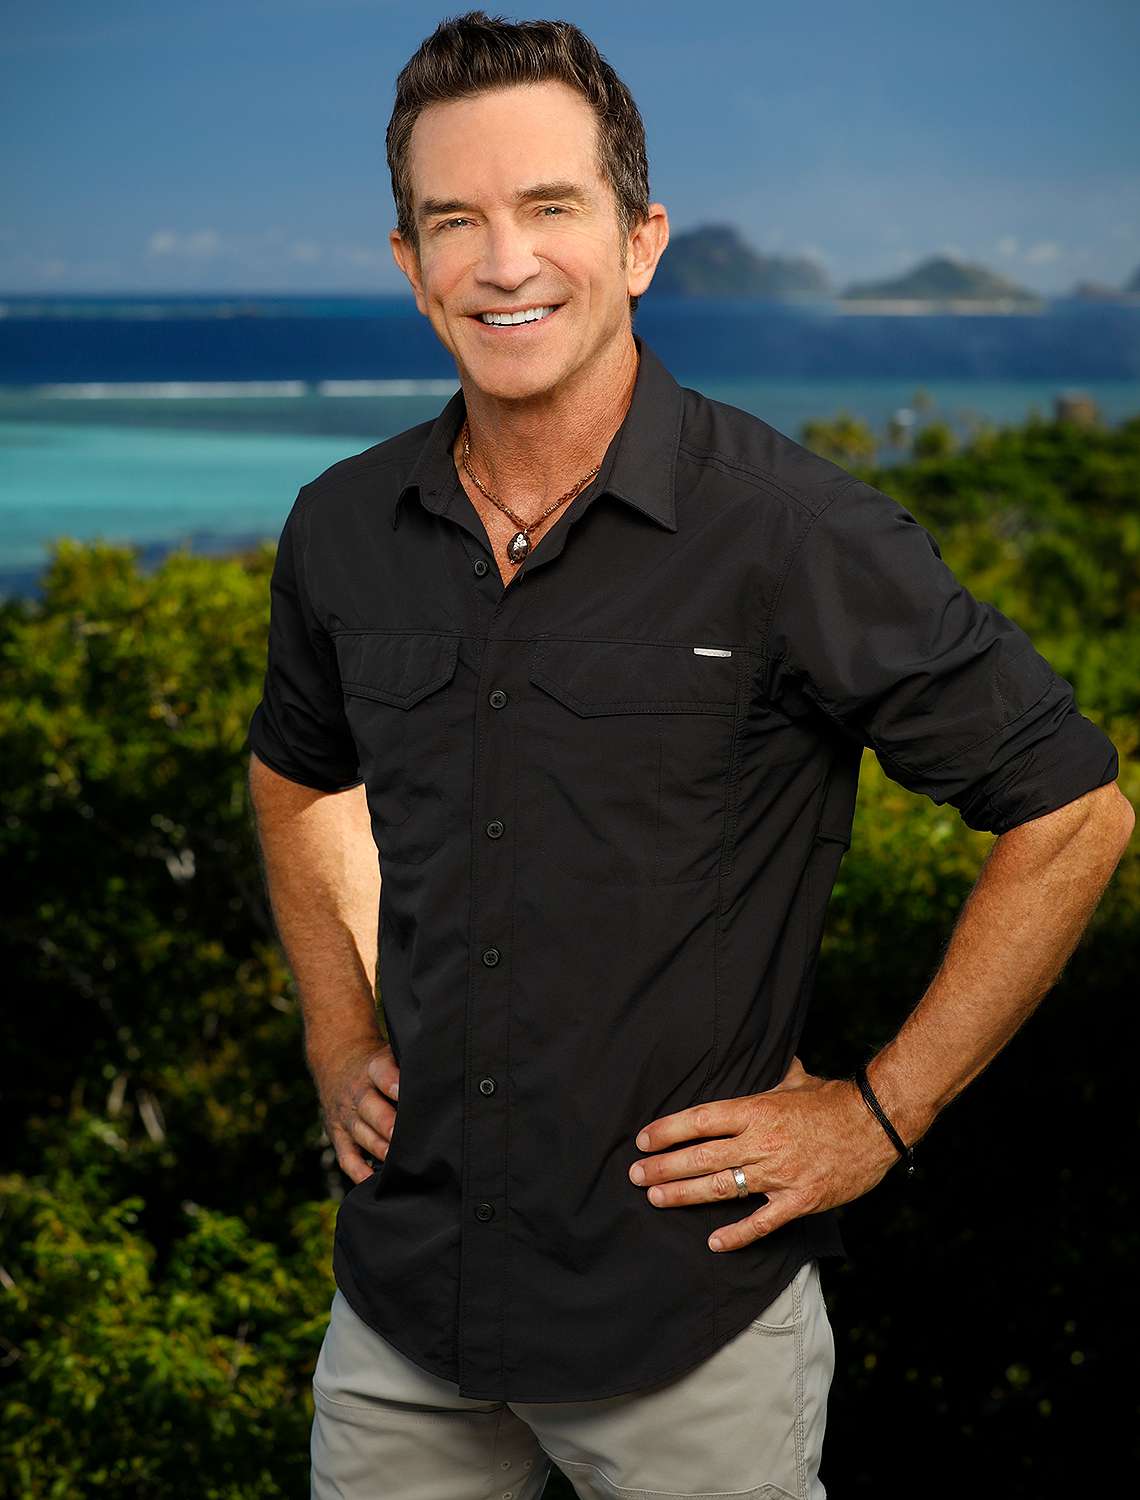 Who did jeff probst date from survivor